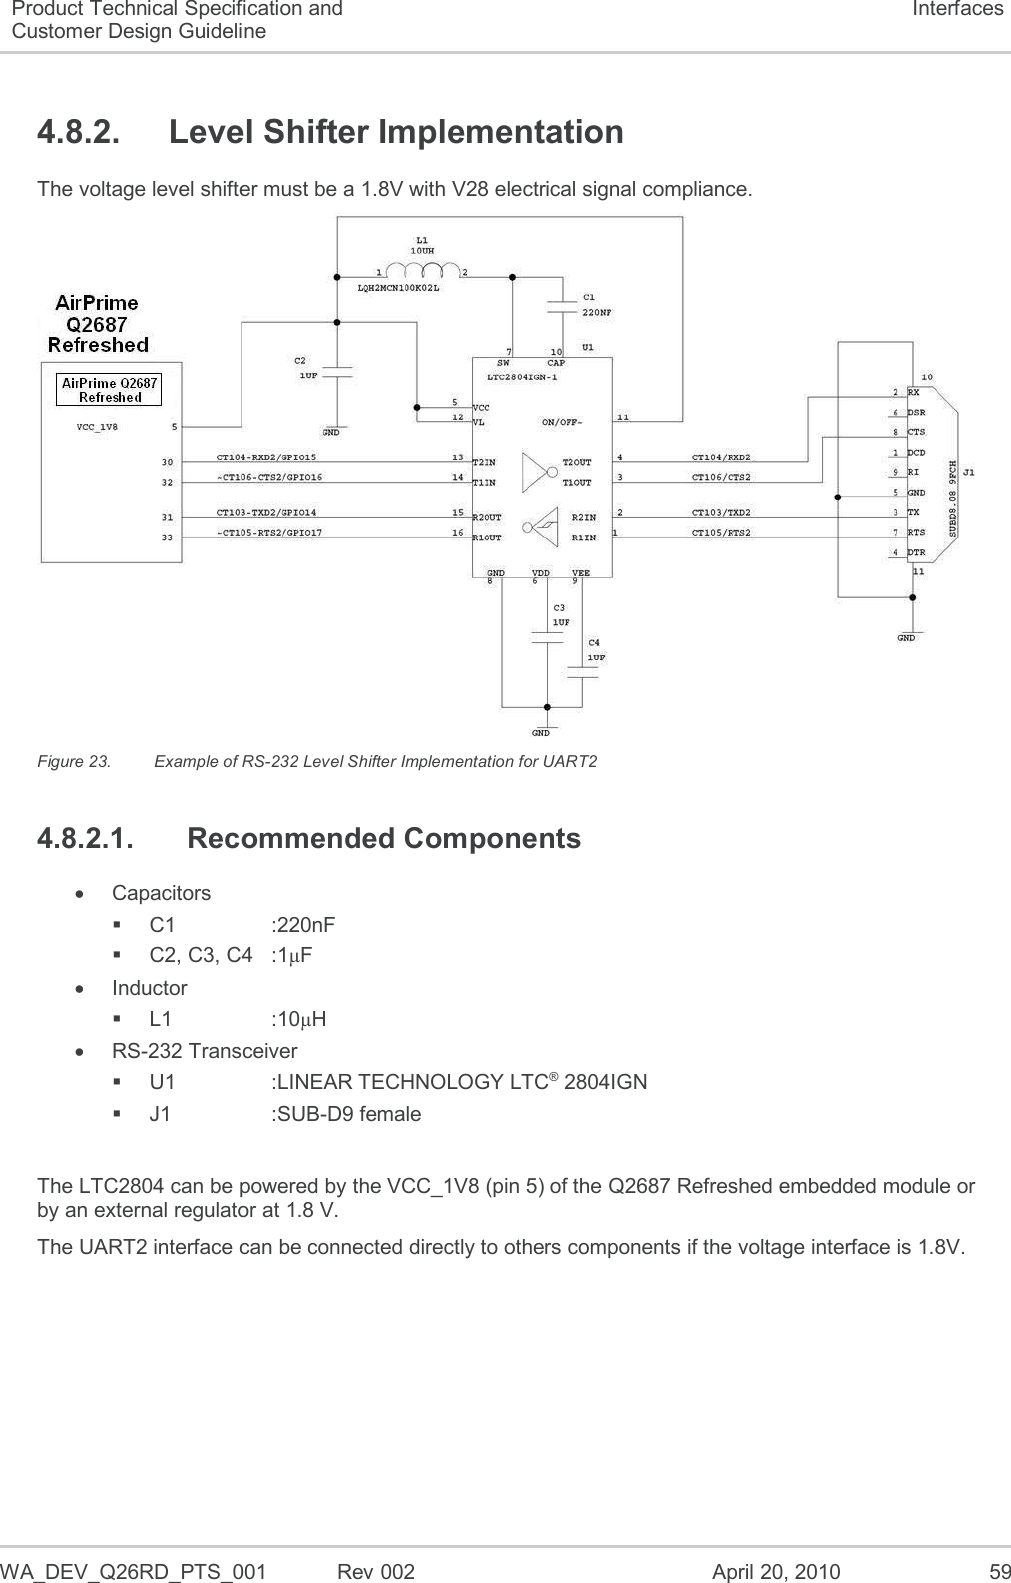  WA_DEV_Q26RD_PTS_001  Rev 002  April 20, 2010 59 Product Technical Specification and Customer Design Guideline Interfaces 4.8.2.  Level Shifter Implementation The voltage level shifter must be a 1.8V with V28 electrical signal compliance.  Figure 23.  Example of RS-232 Level Shifter Implementation for UART2 4.8.2.1.  Recommended Components   Capacitors  C1    :220nF    C2, C3, C4  :1µF   Inductor  L1    :10µH  RS-232 Transceiver  U1    :LINEAR TECHNOLOGY LTC® 2804IGN   J1    :SUB-D9 female   The LTC2804 can be powered by the VCC_1V8 (pin 5) of the Q2687 Refreshed embedded module or by an external regulator at 1.8 V. The UART2 interface can be connected directly to others components if the voltage interface is 1.8V. 